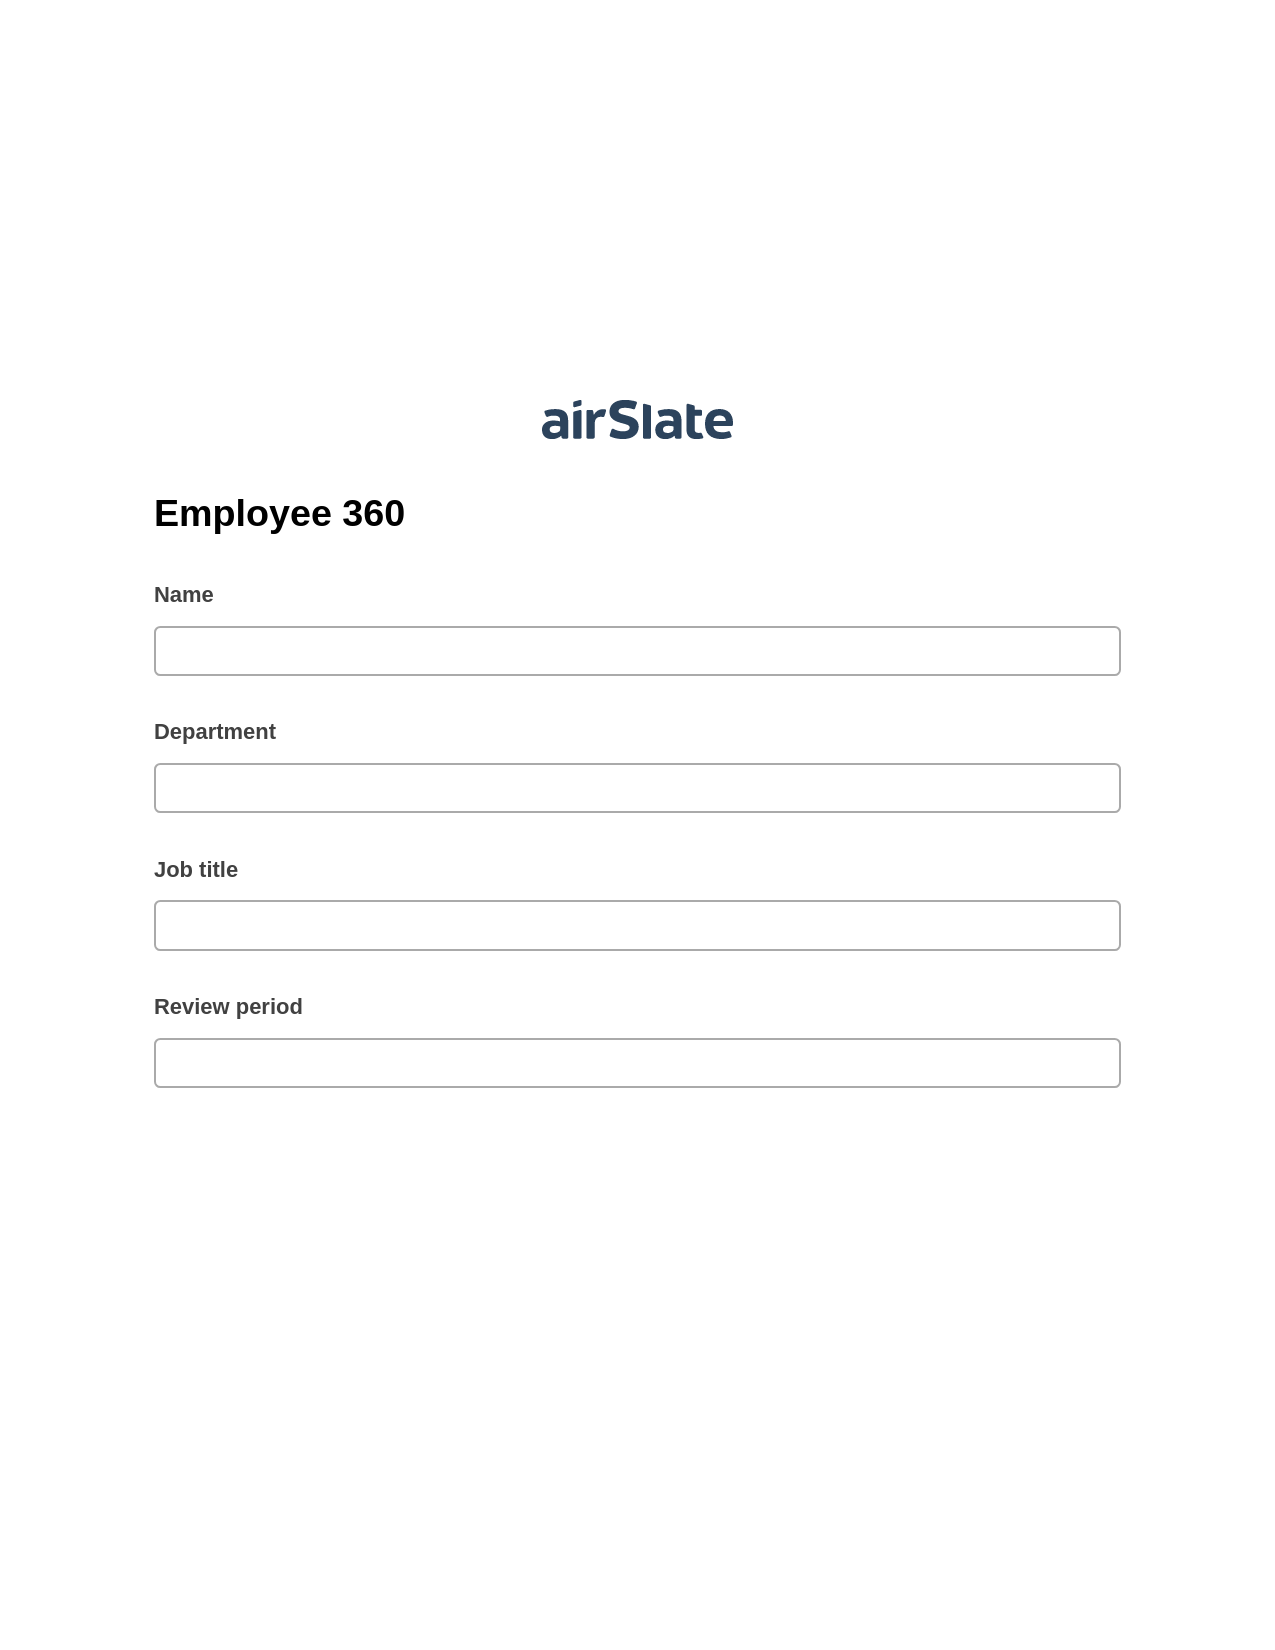 Multirole Employee 360 Pre-fill from AirTable Bot, Update MS Dynamics 365 Record Bot, Export to WebMerge Bot